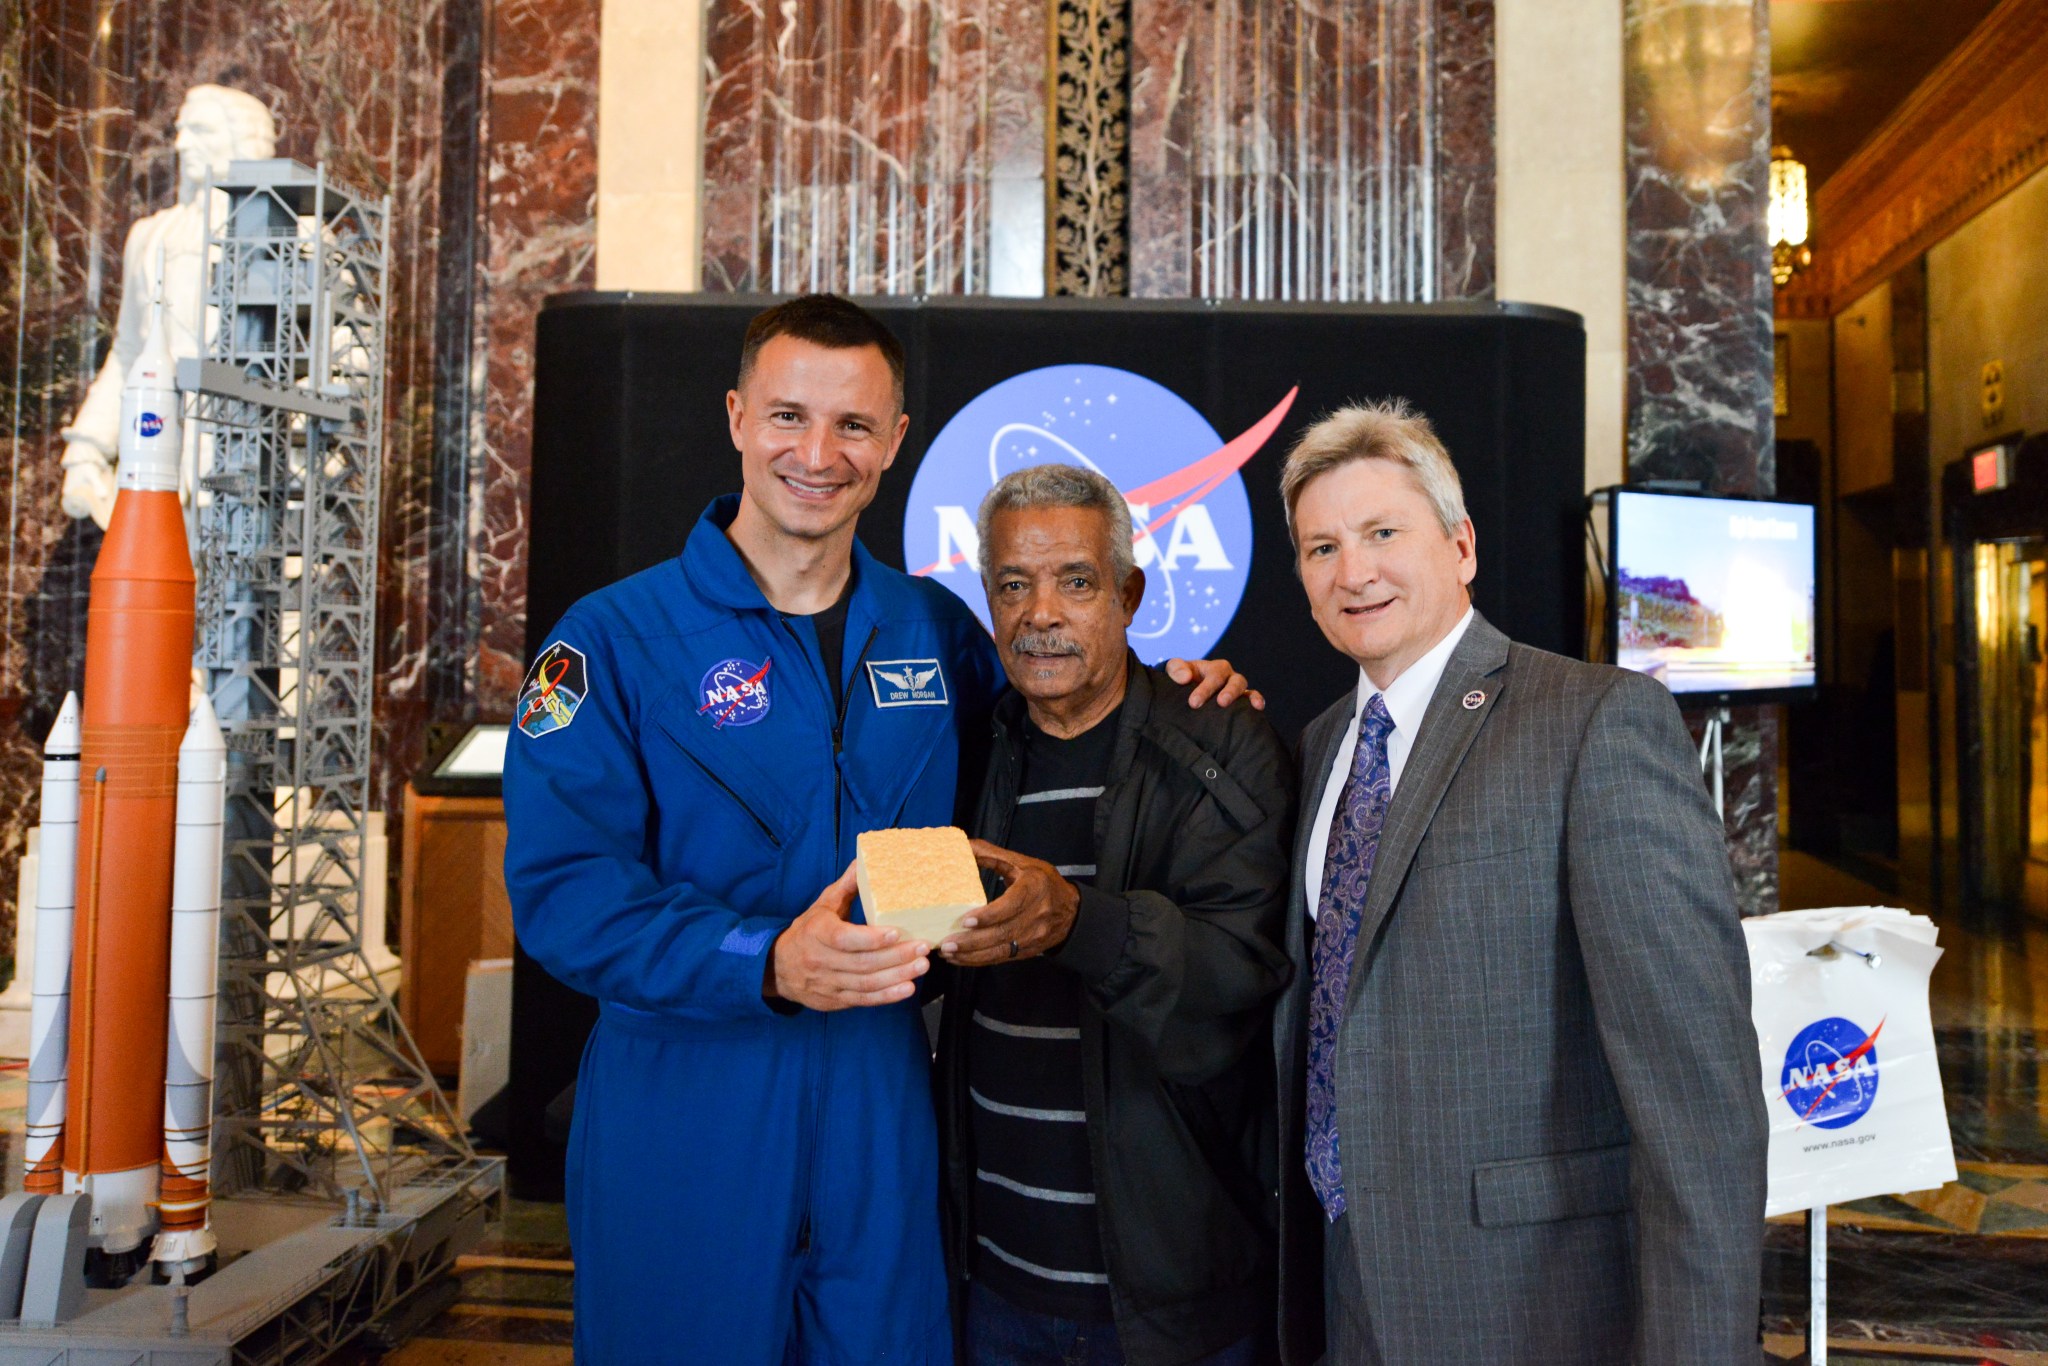 From left, NASA astronaut Drew Morgan, Roland Diaz a retired Michoud employee, and Johnny Stephenson.